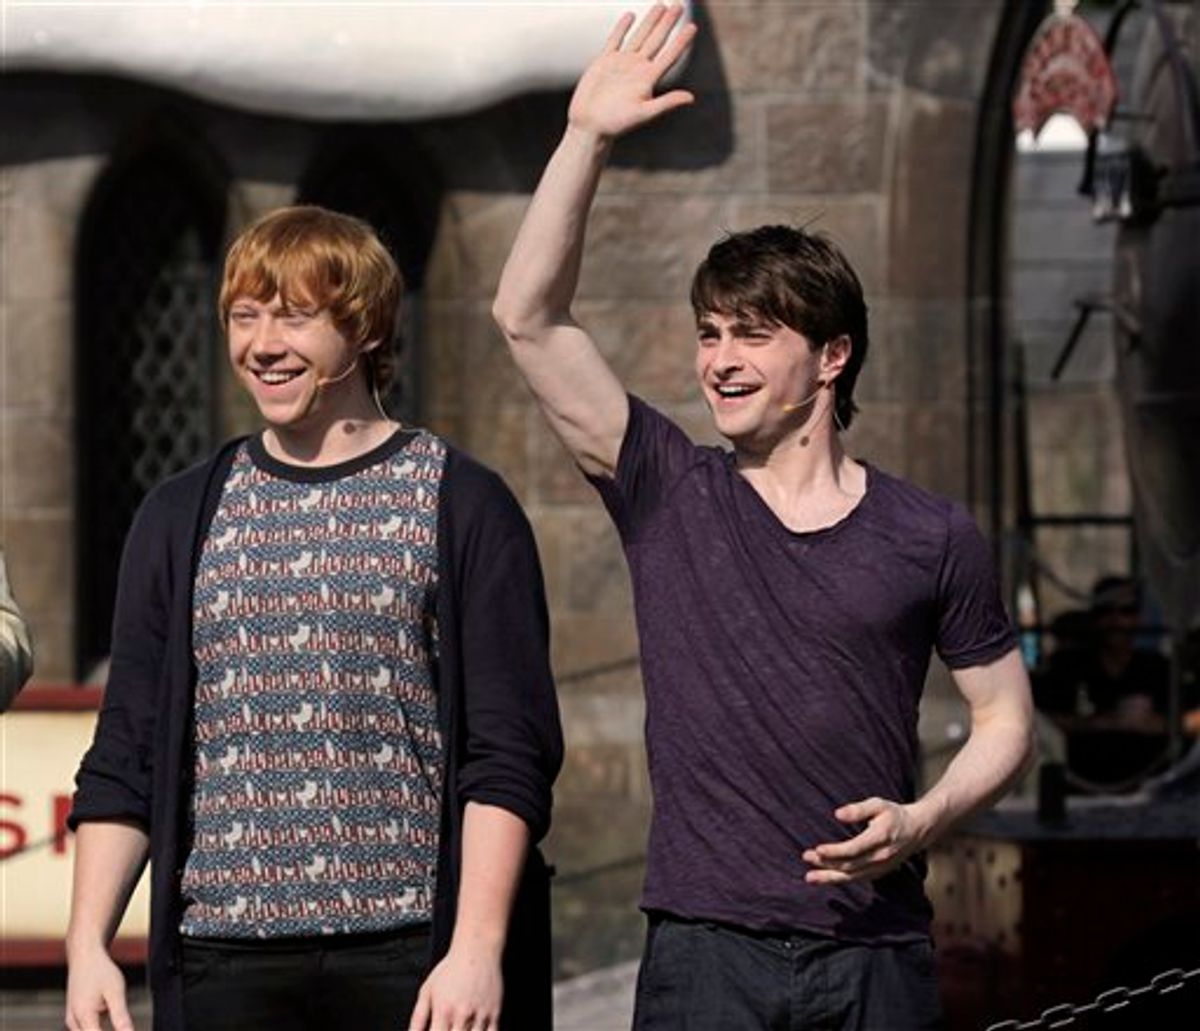 Actors Rupert Grint, left, and Daniel Radcliffe greet fans at the grand opening of the Wizarding World of Harry Potter at Universal Orlando theme park in Orlando, Fla., Friday, June 18, 2010.(AP Photo/John Raoux) (AP)